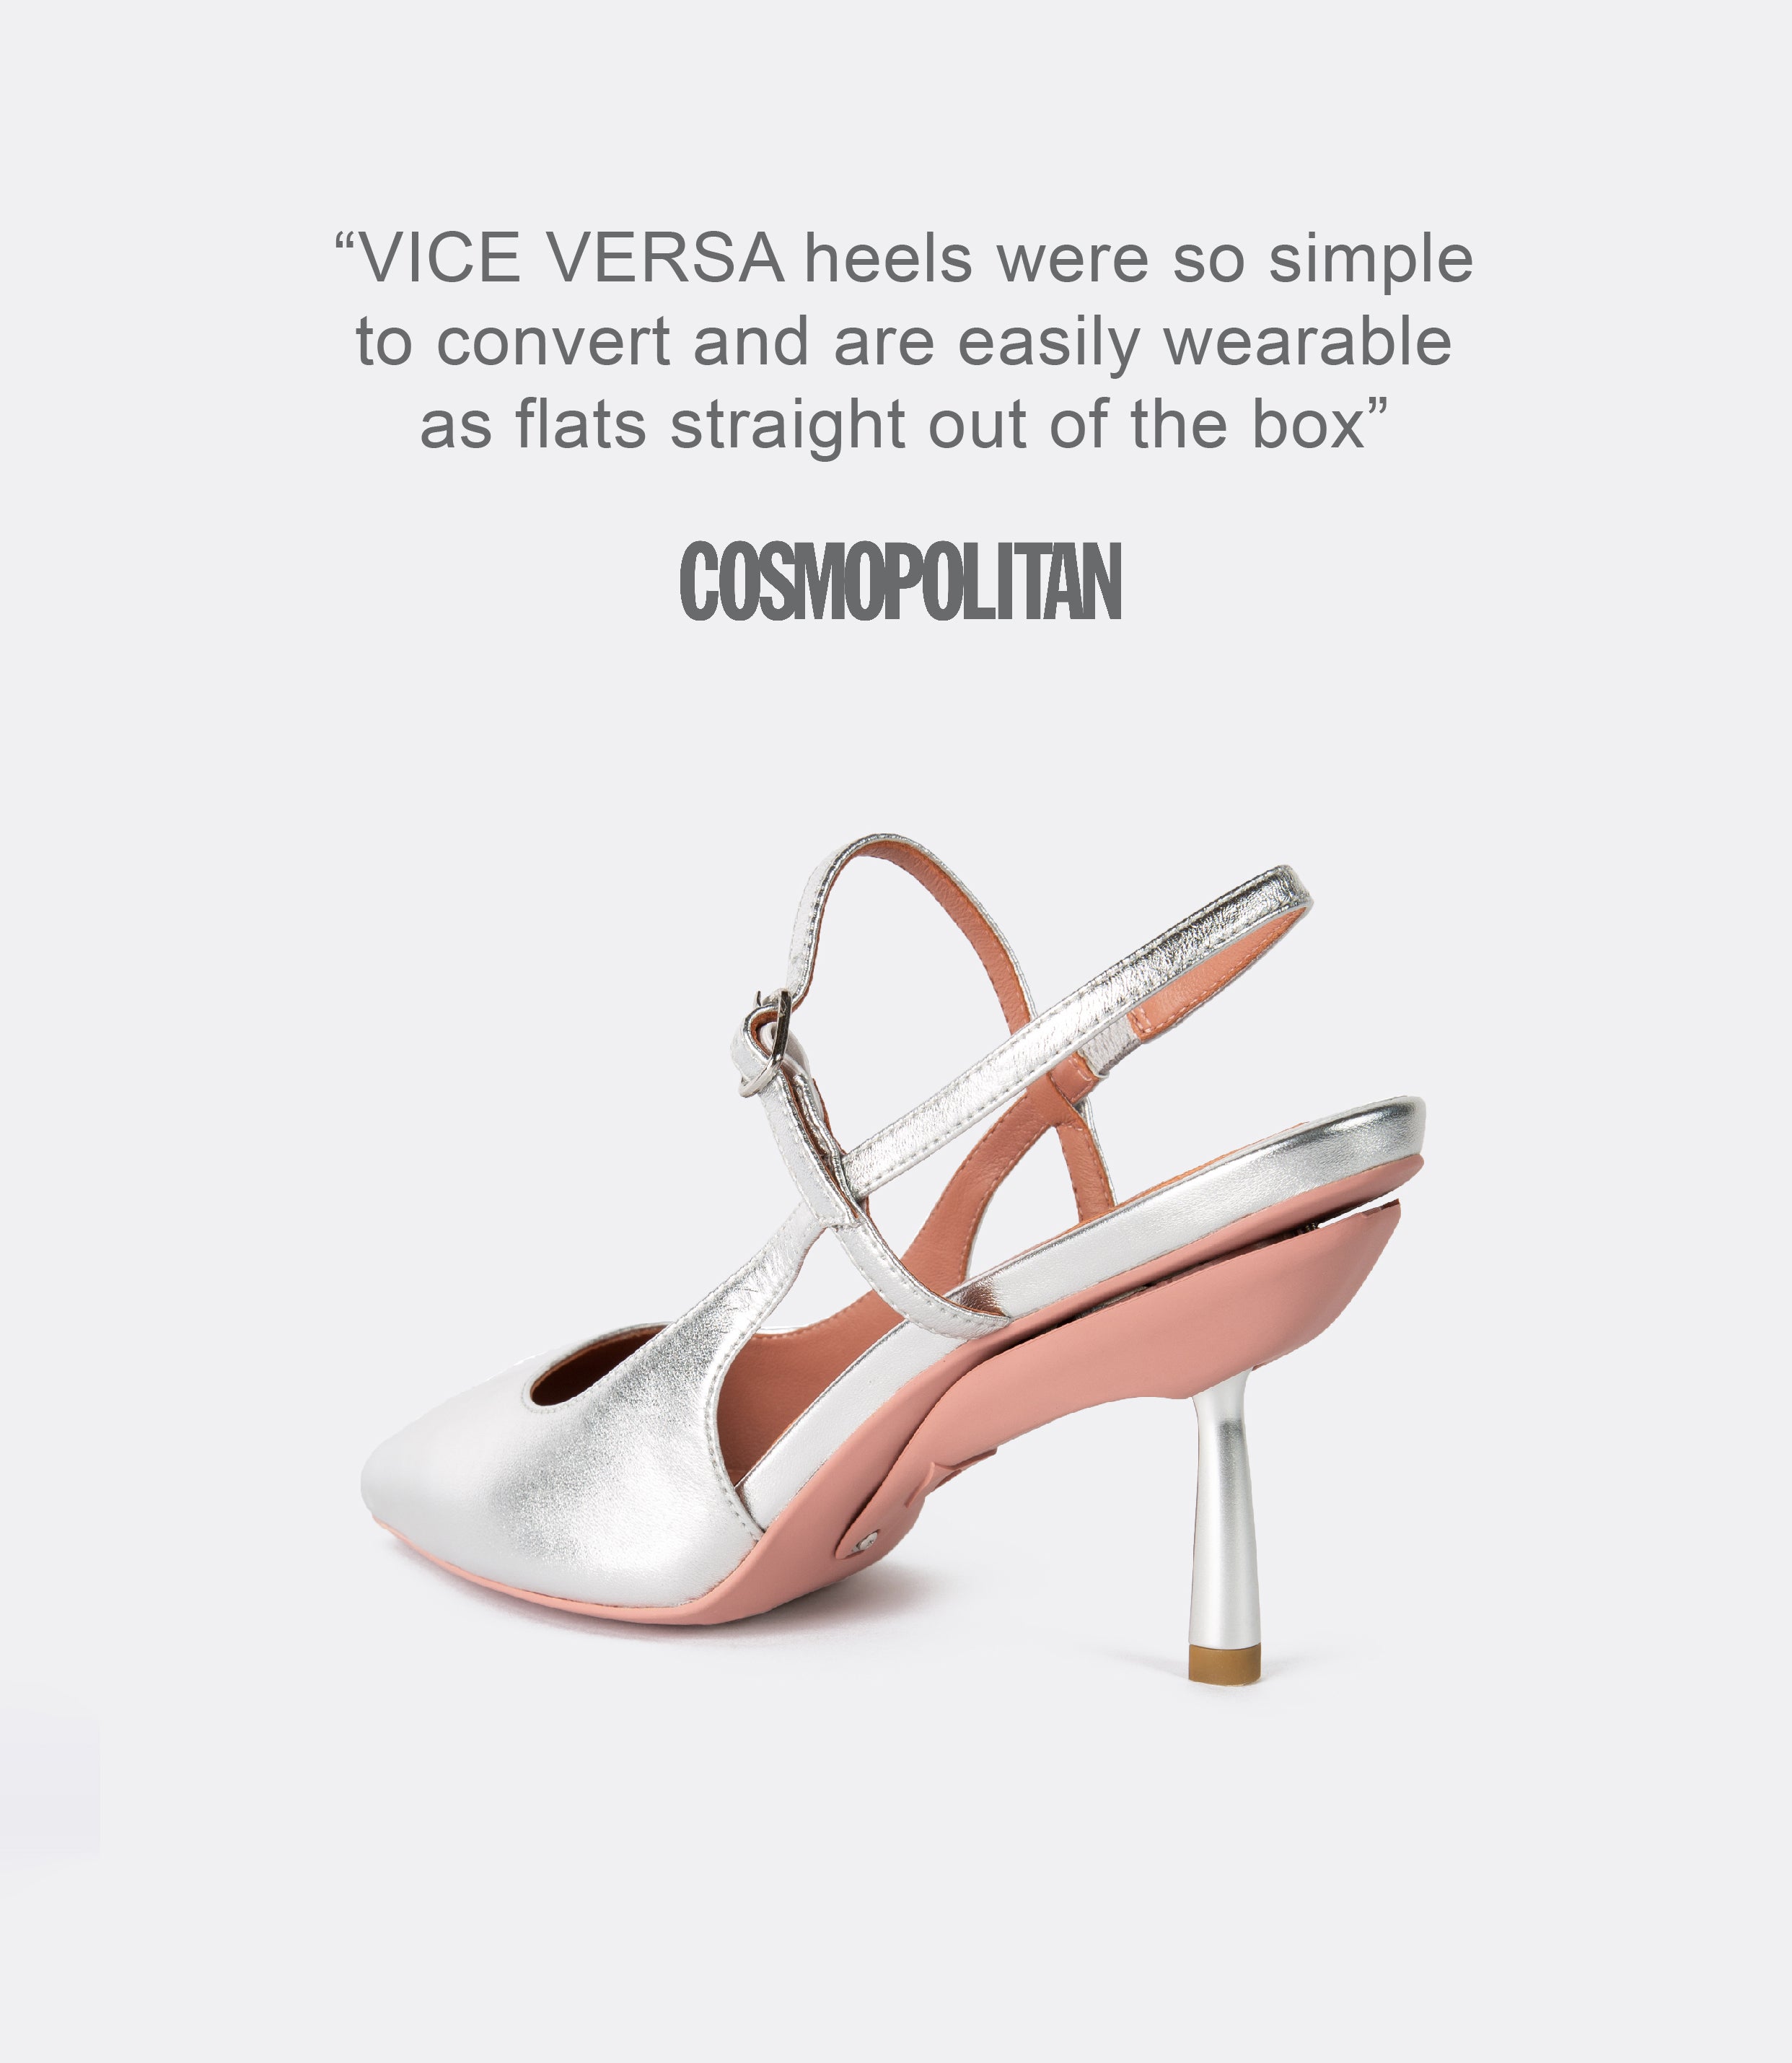 A quote from Cosmopolitan and a back view of the silver buckle slingbacks as heels